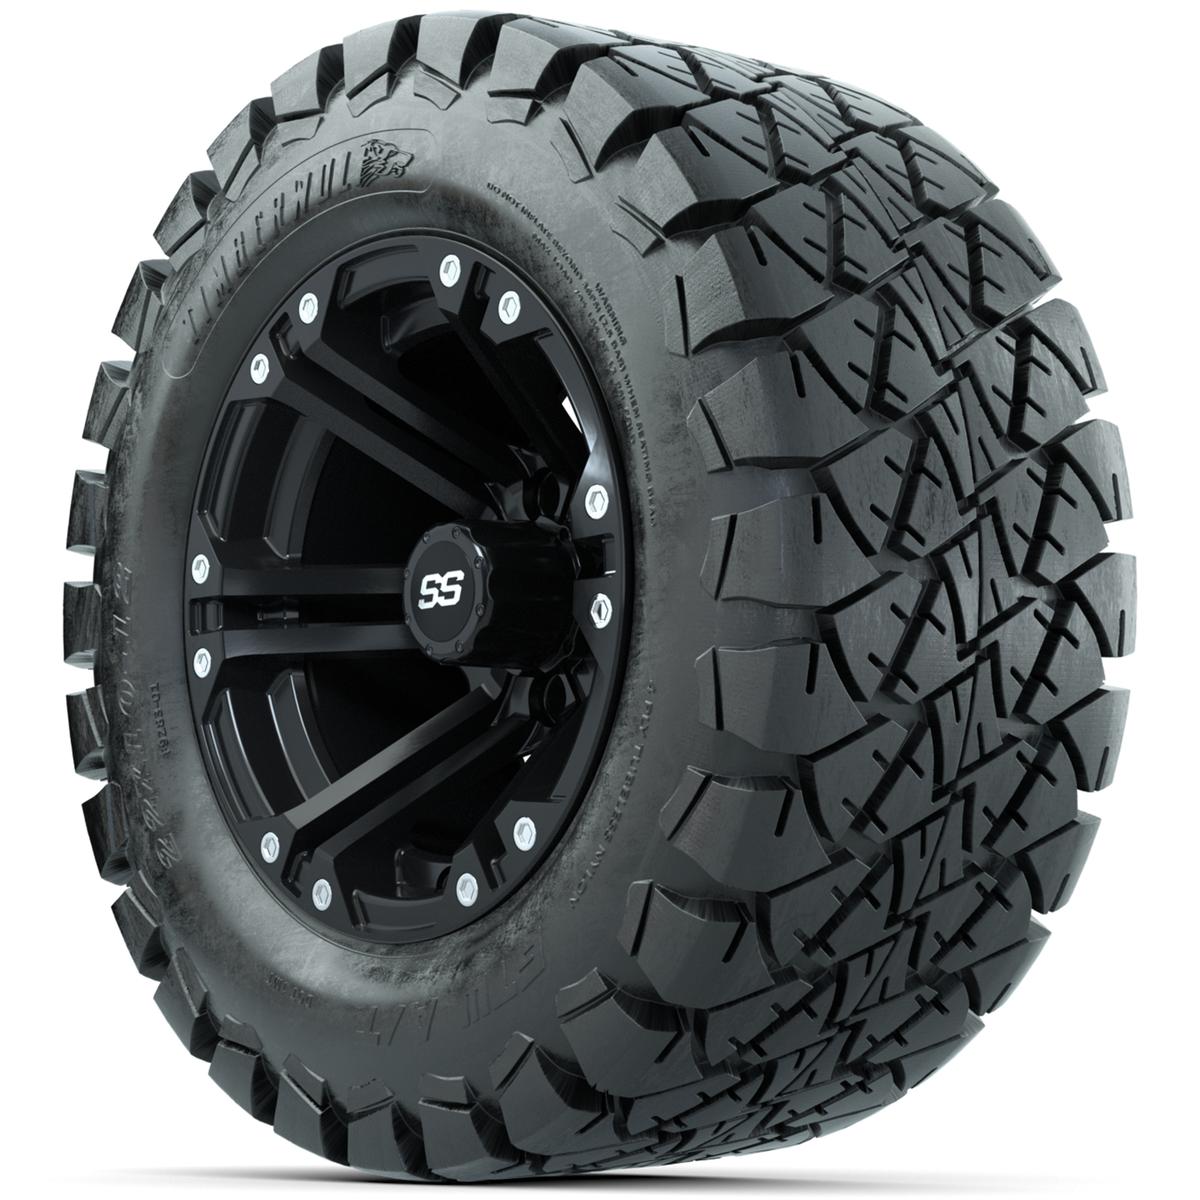 Set of (4) 12 in GTW Specter Wheels with 22x10-12 GTW Timberwolf All-Terrain Tires